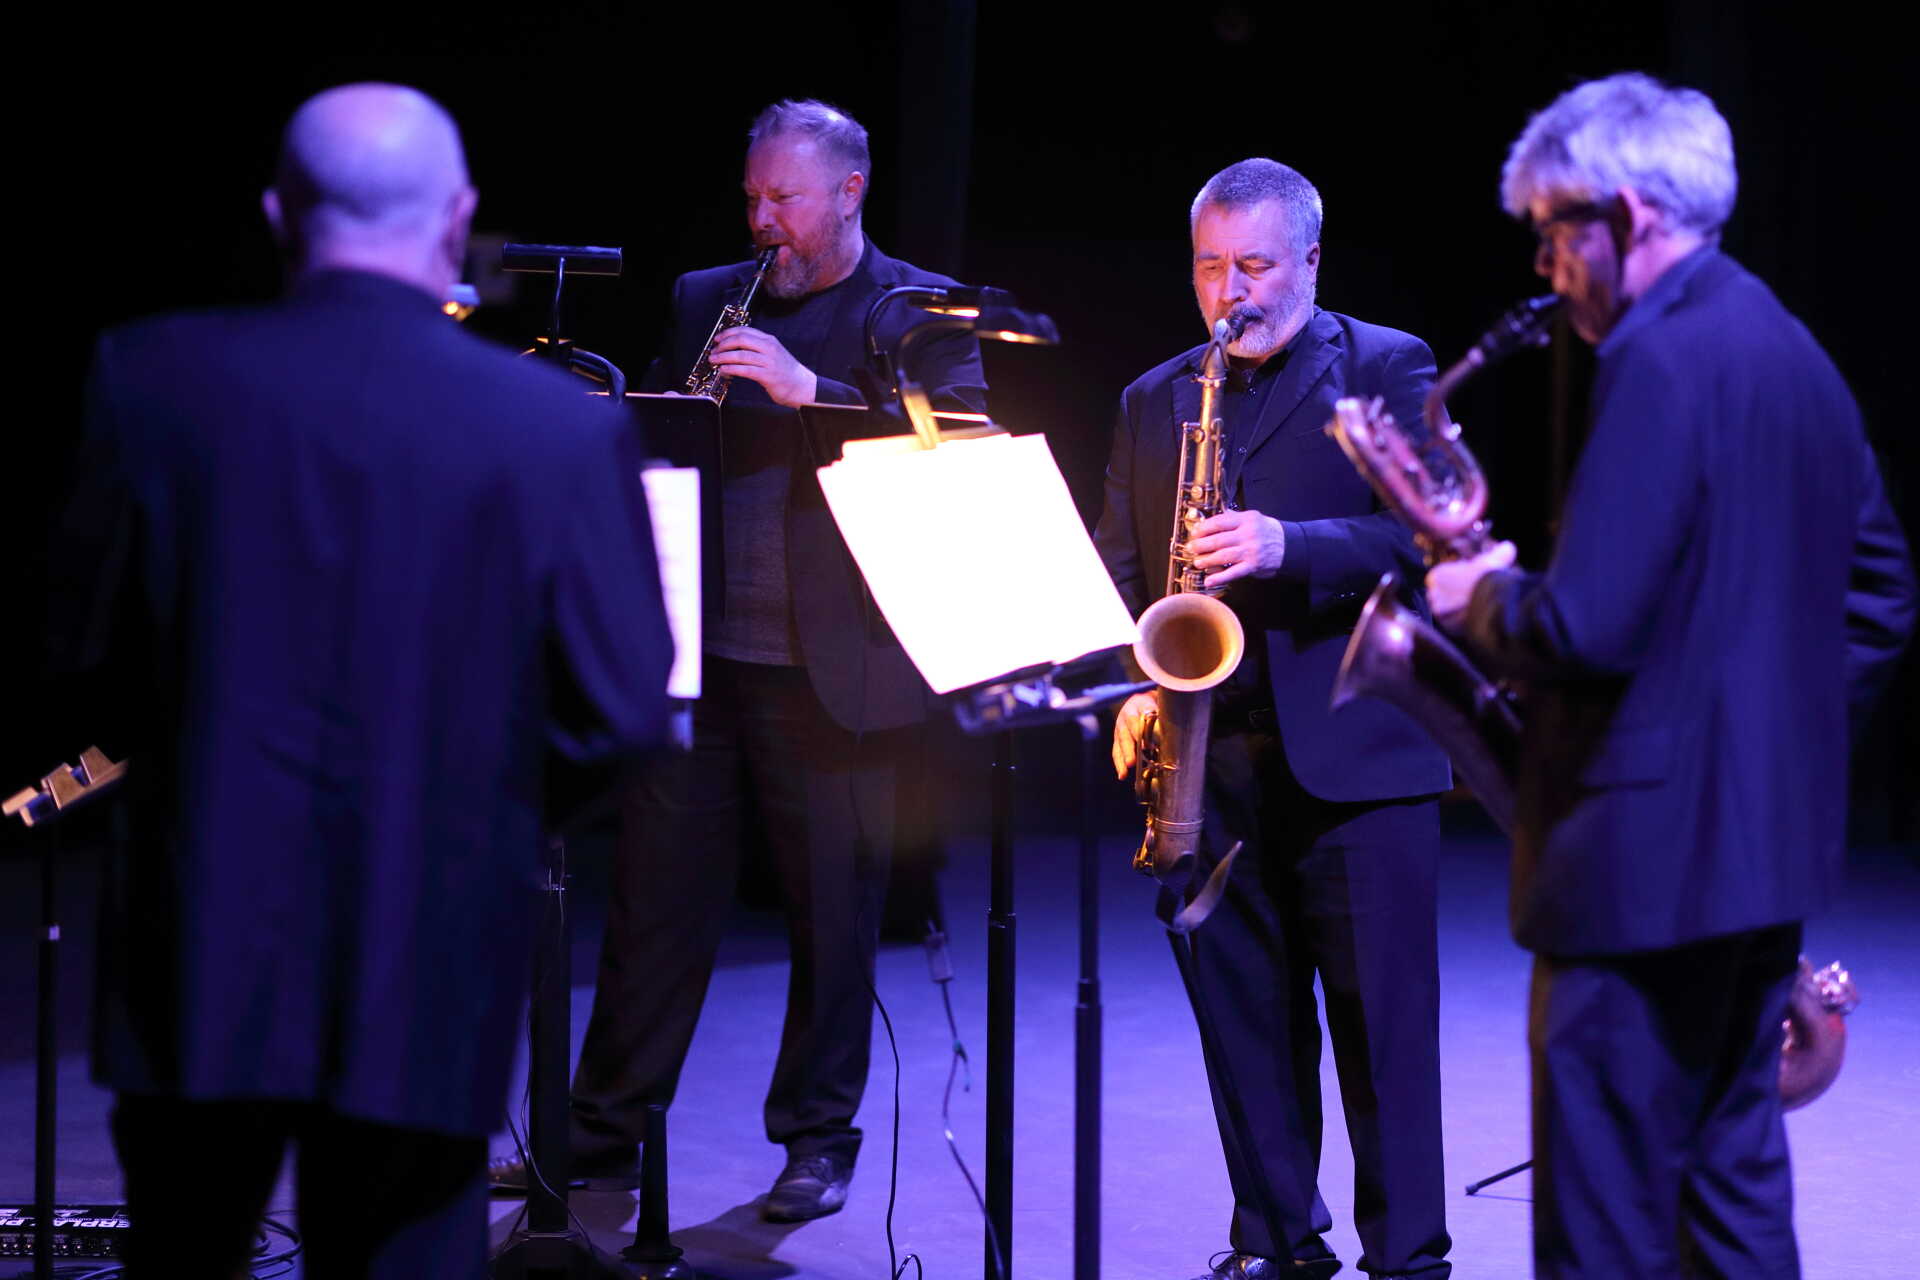 Four male saxophonists performing beneath purple lighting